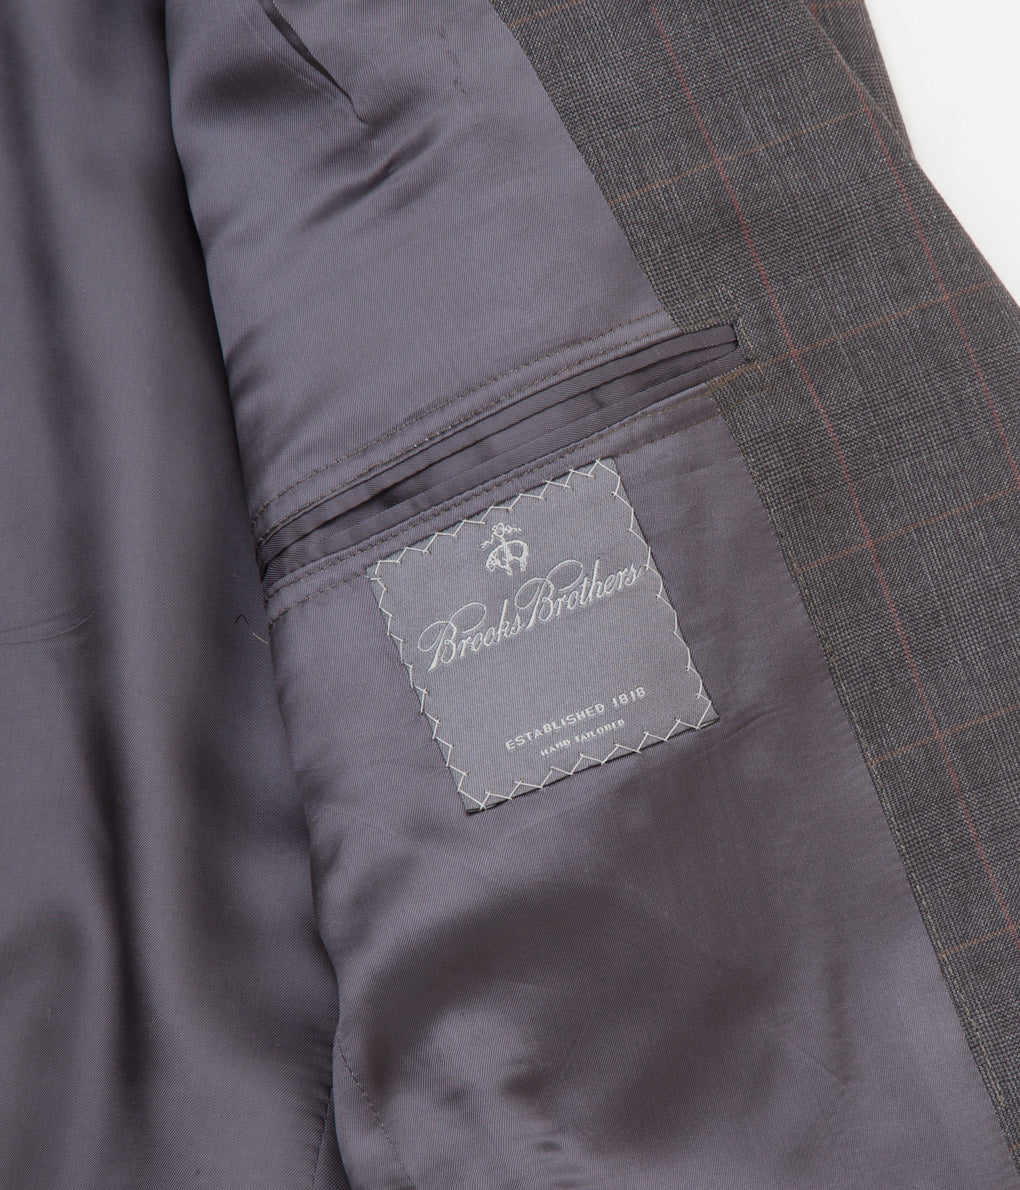 FROM USA "DEAD STOCK BROOKS BROTHERS WOOL SHADOW CHECK SUITS"(CHARCOAL)